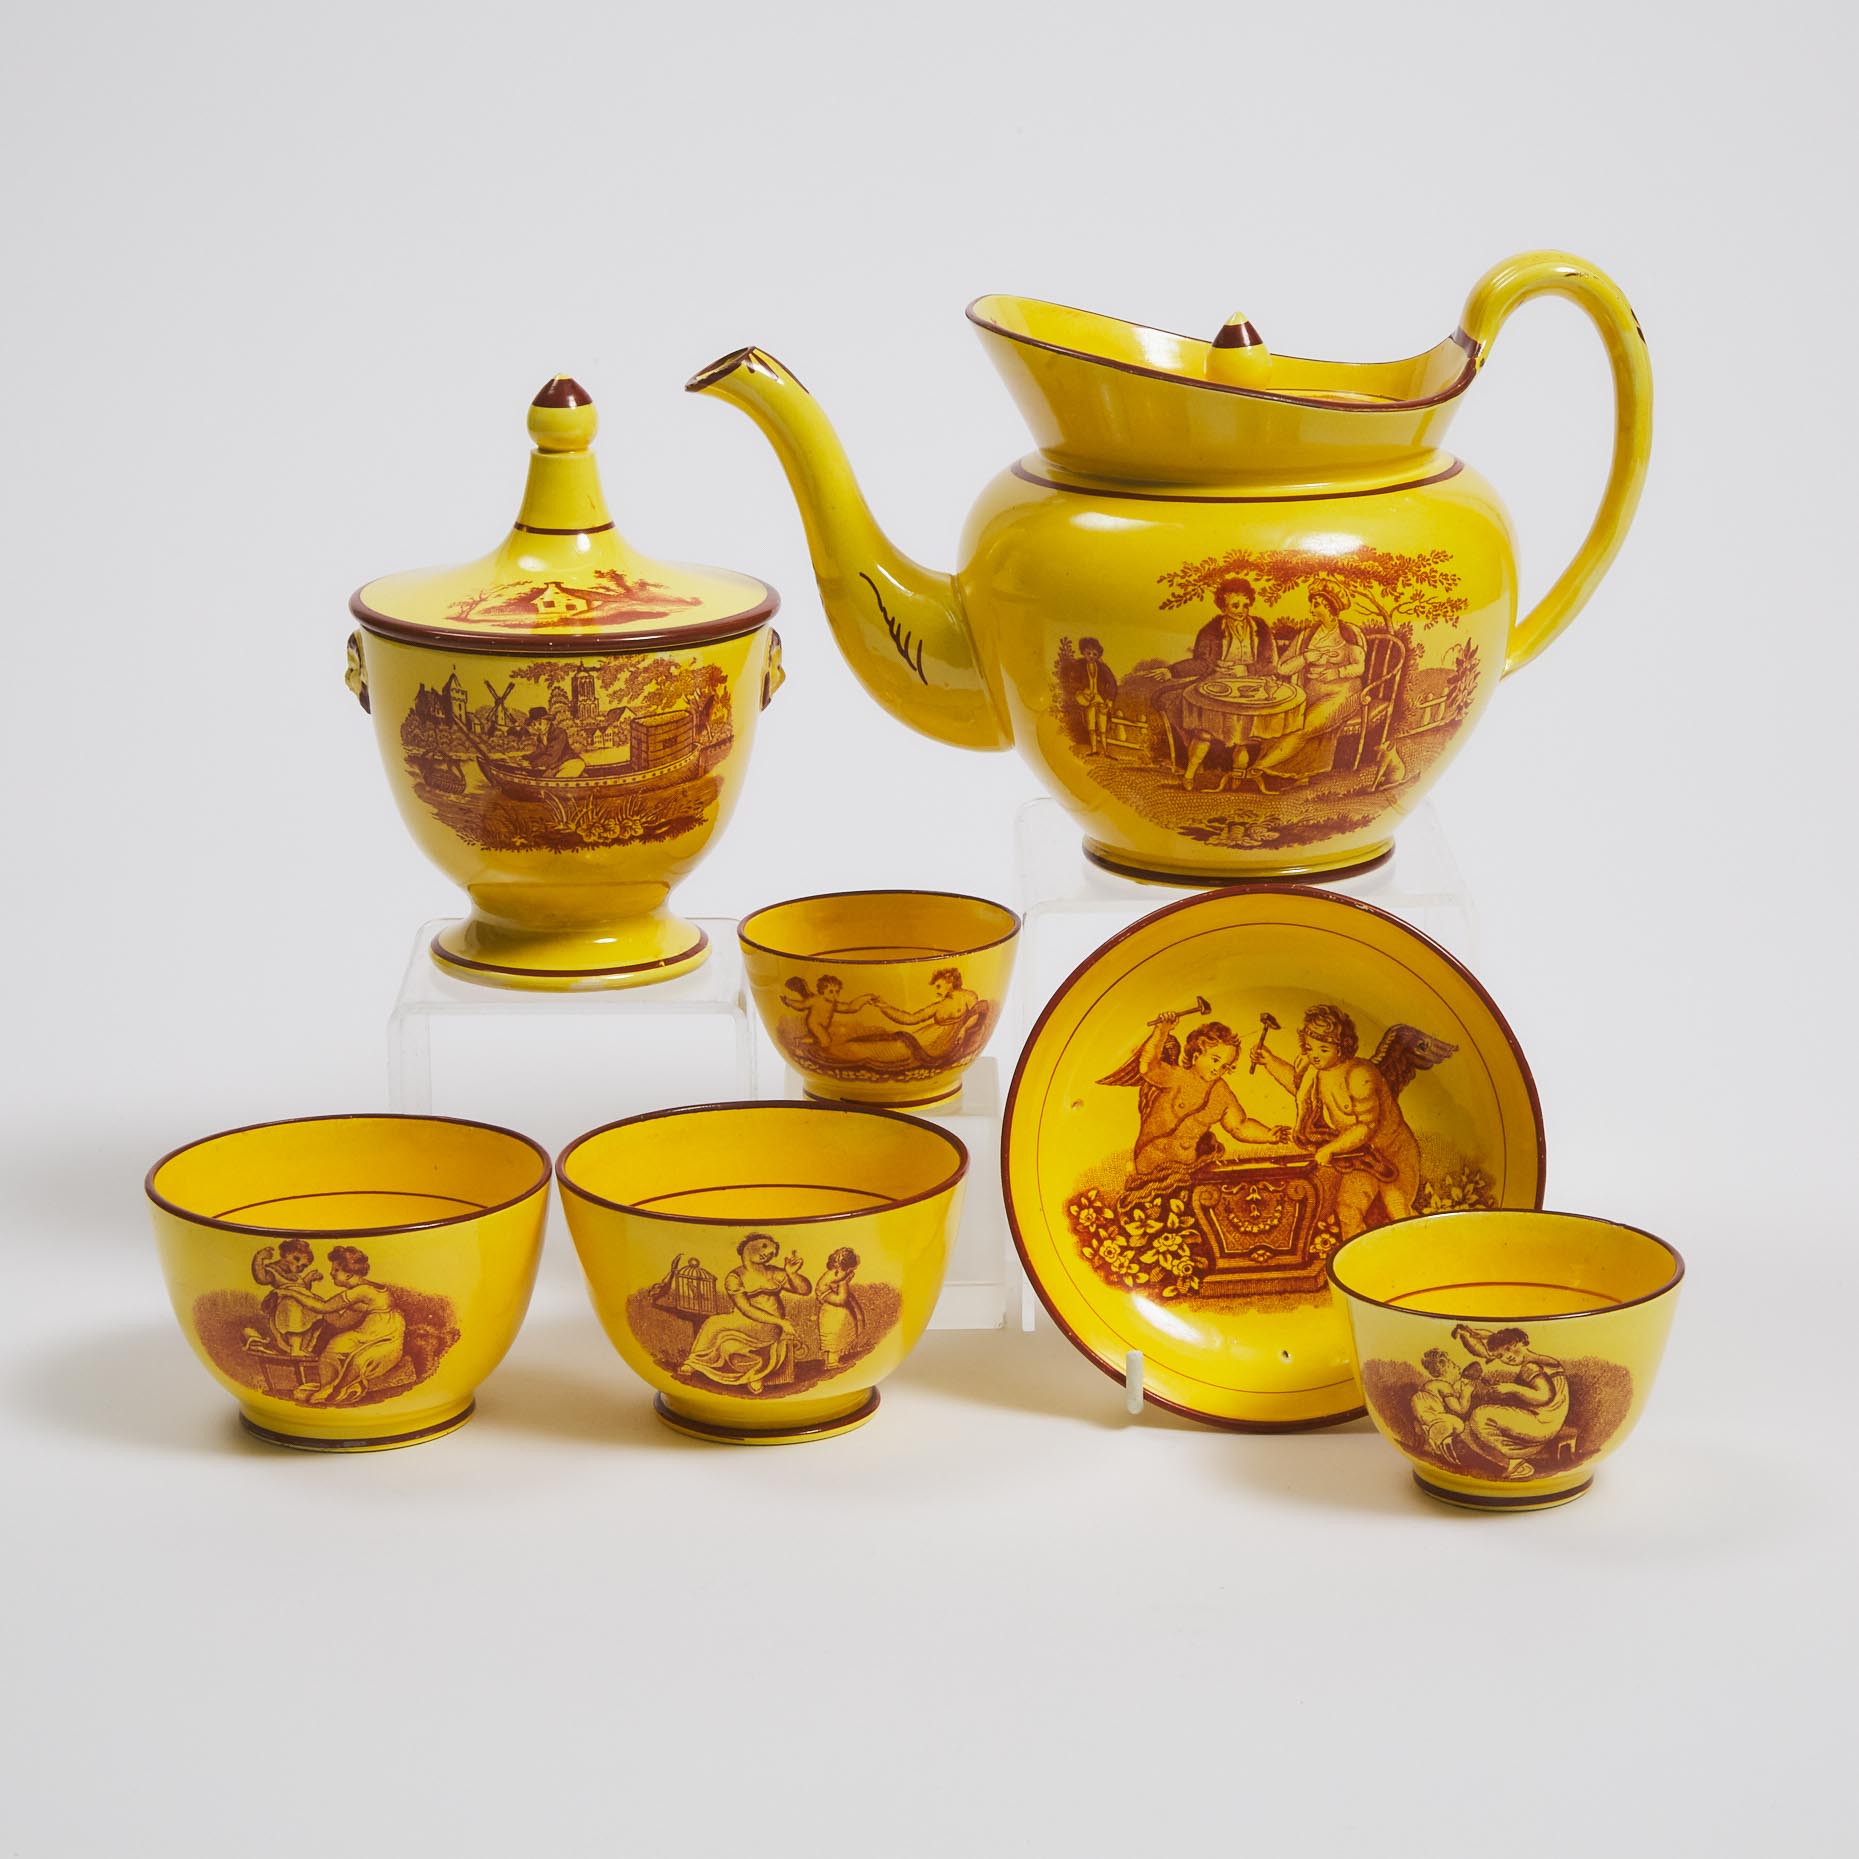 Group of English Red Printed Yellow Ground Earthenware Teawares, c.1810-30